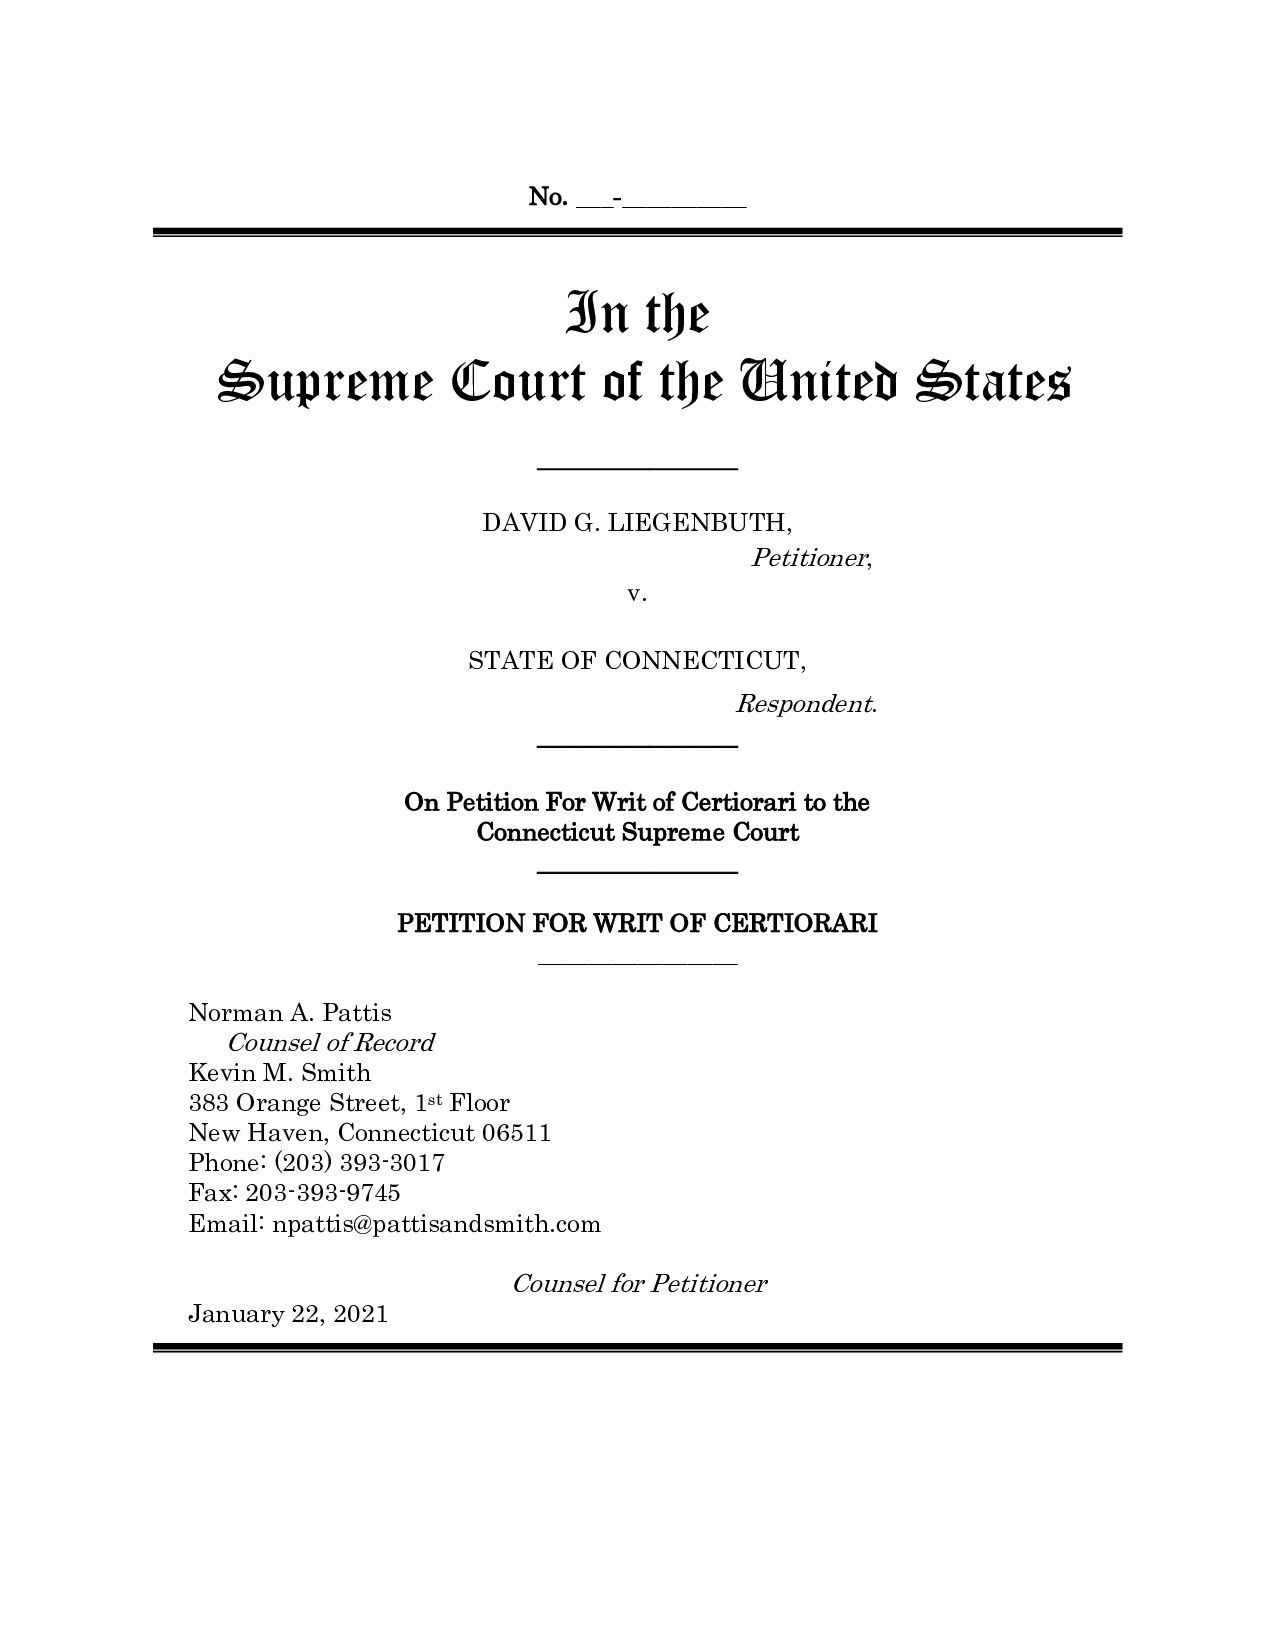 Petition for Writ of Certiorari - David G. Liegenbuth v. State of Connecticut